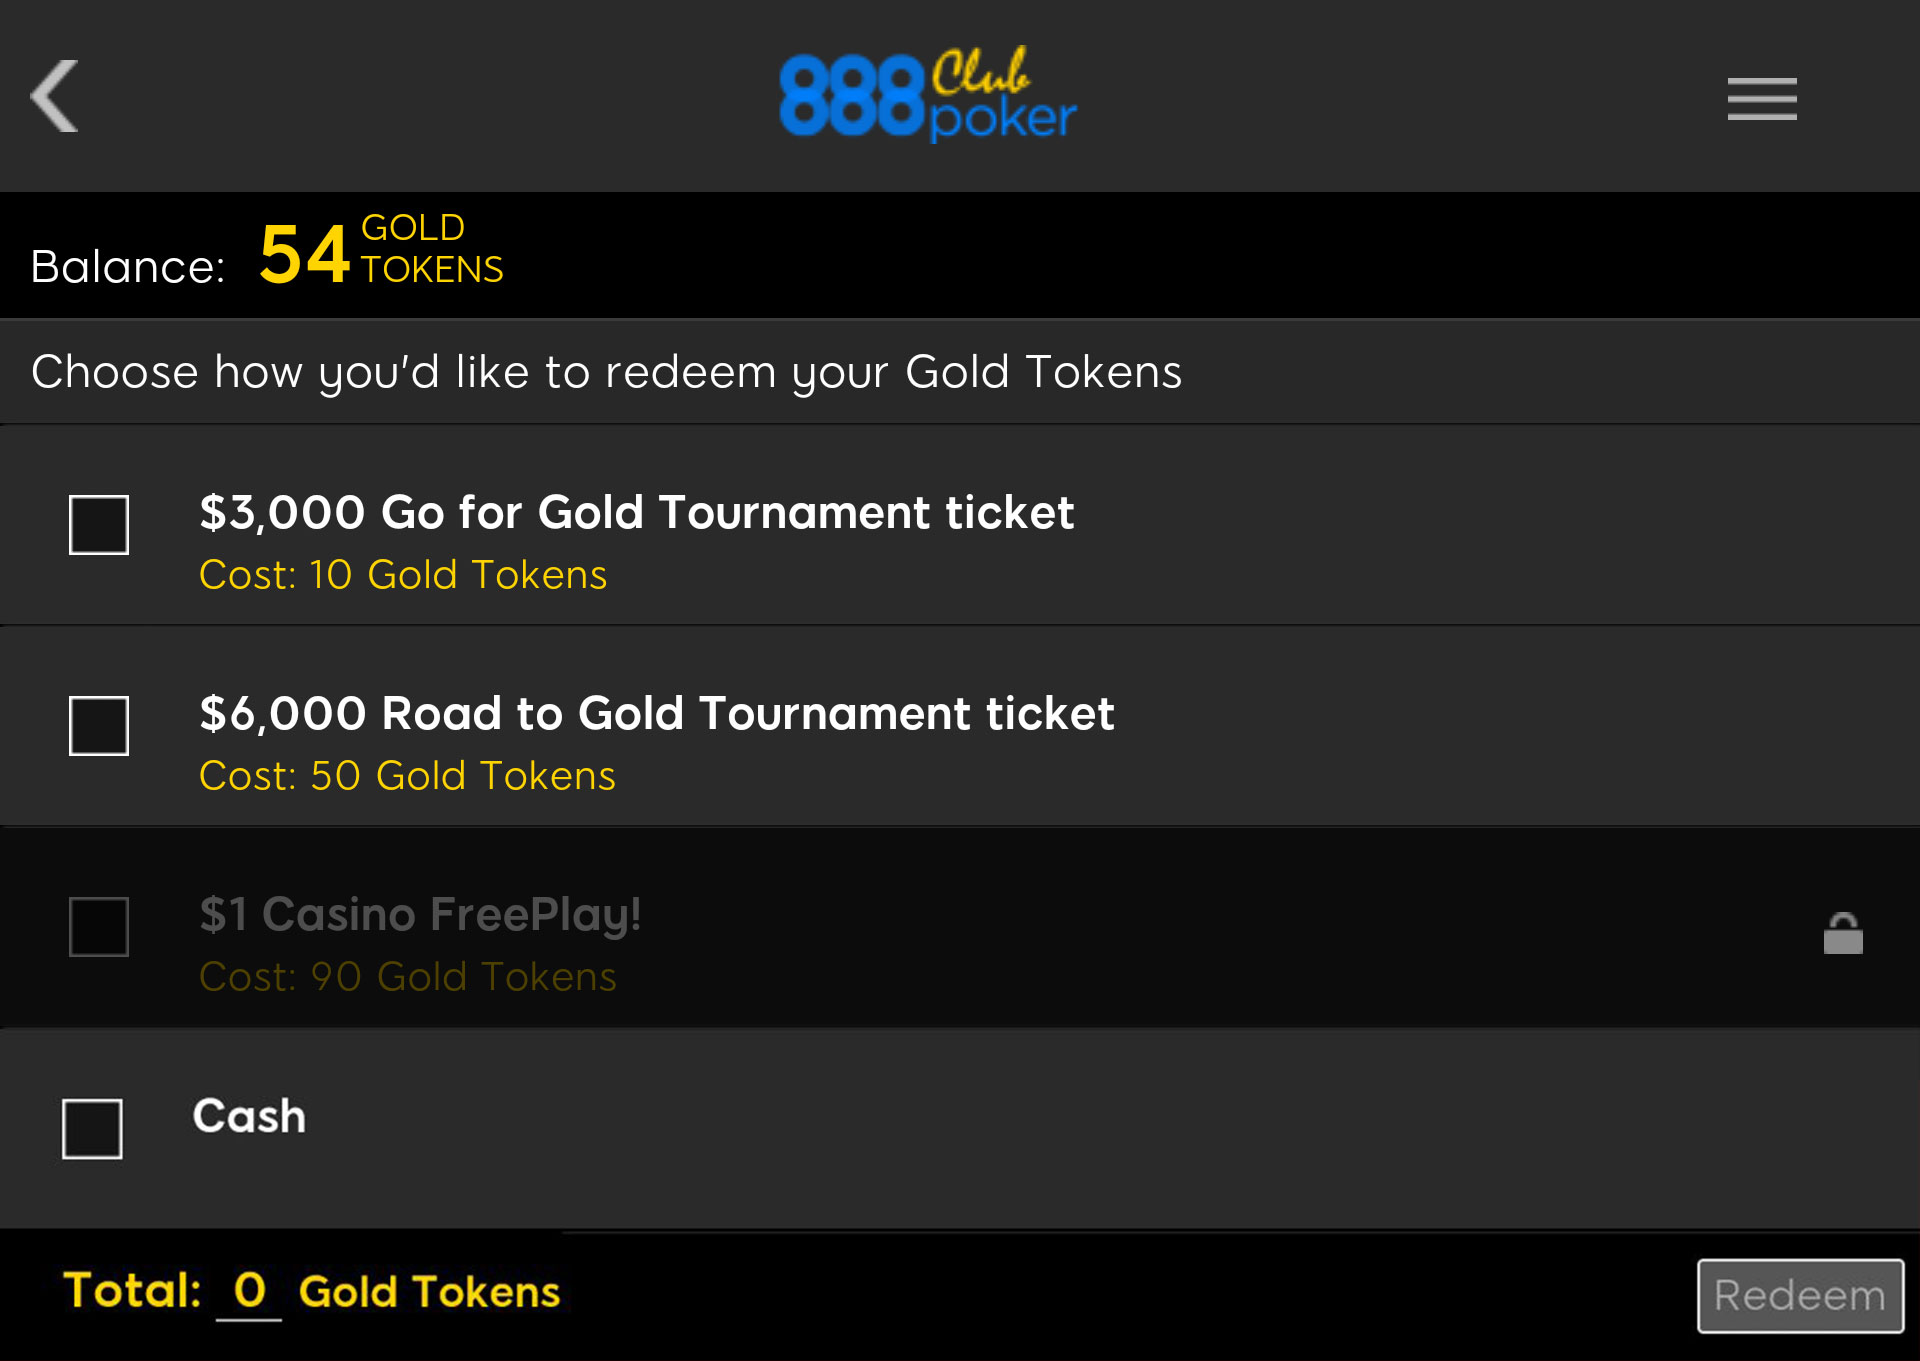 How to redeem your Gold Tokens for prizes